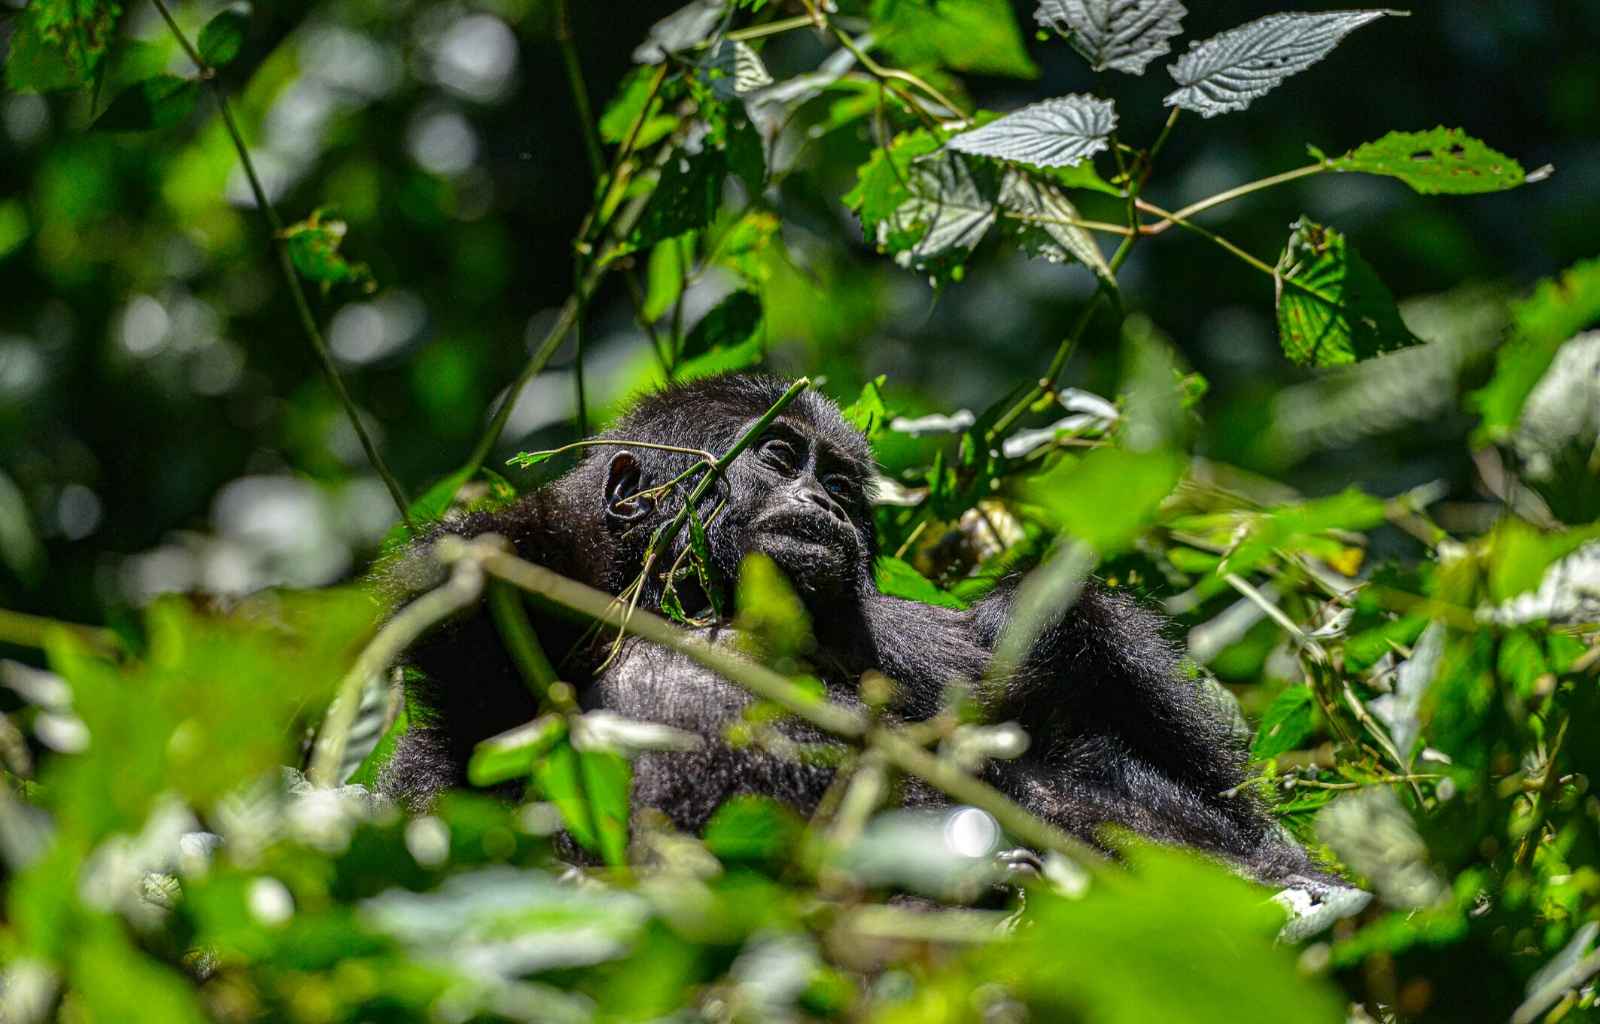 Explore and Travel Africa Top 6 Bwindi Impenetrable National Park Lodges